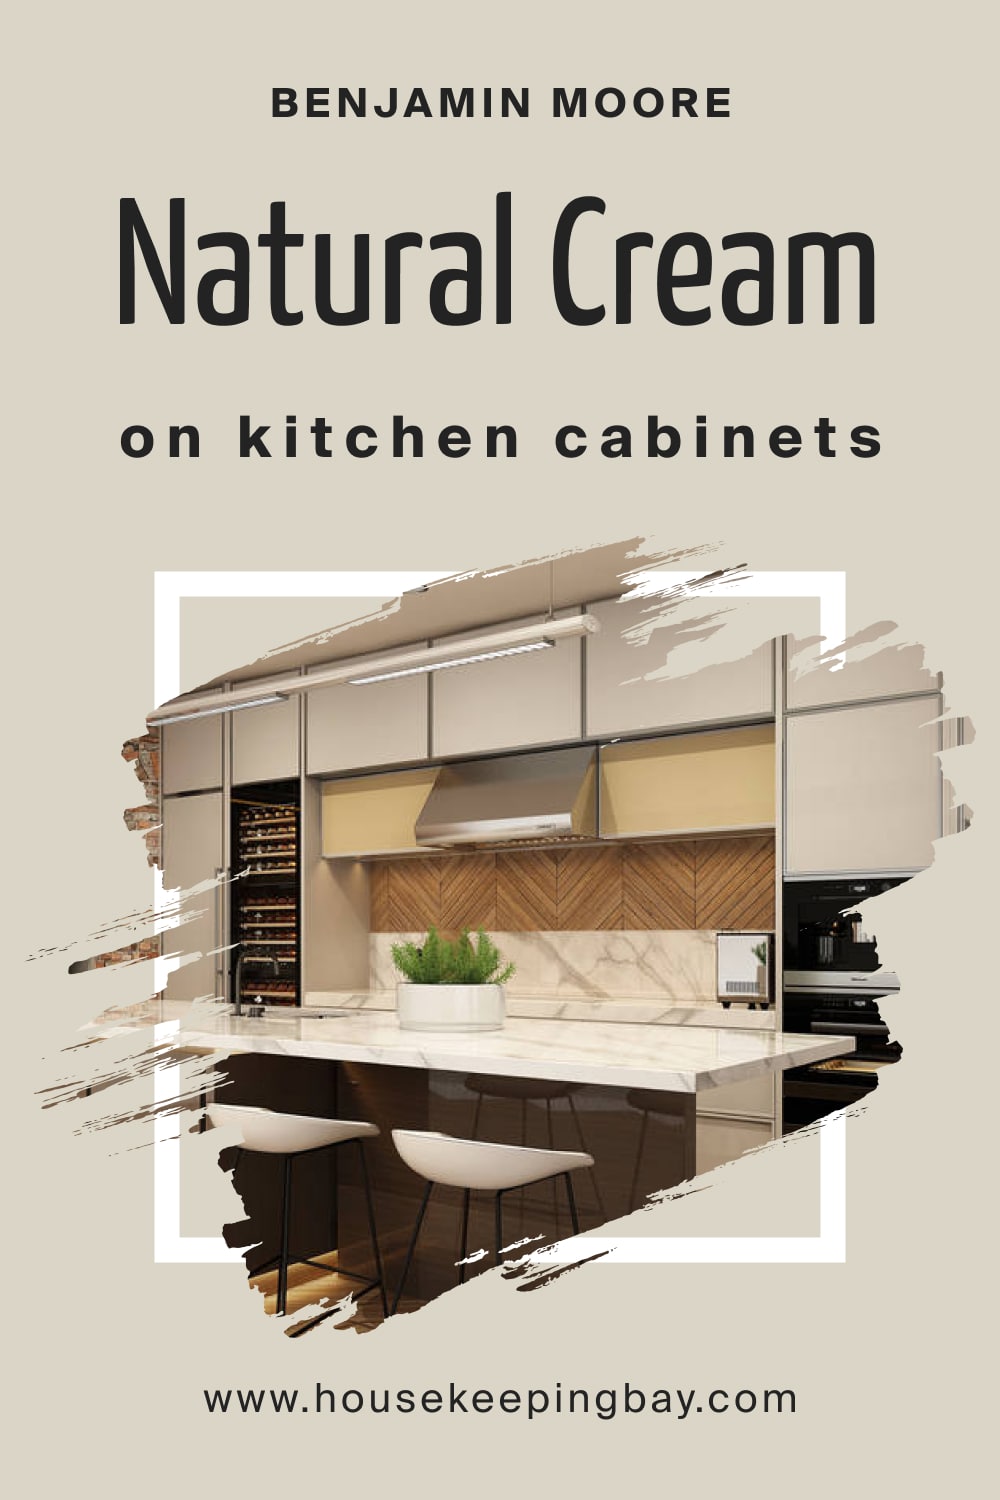 Sherwin Williams. Natural Cream OC 14 For the KitchenKitchen Cabinets